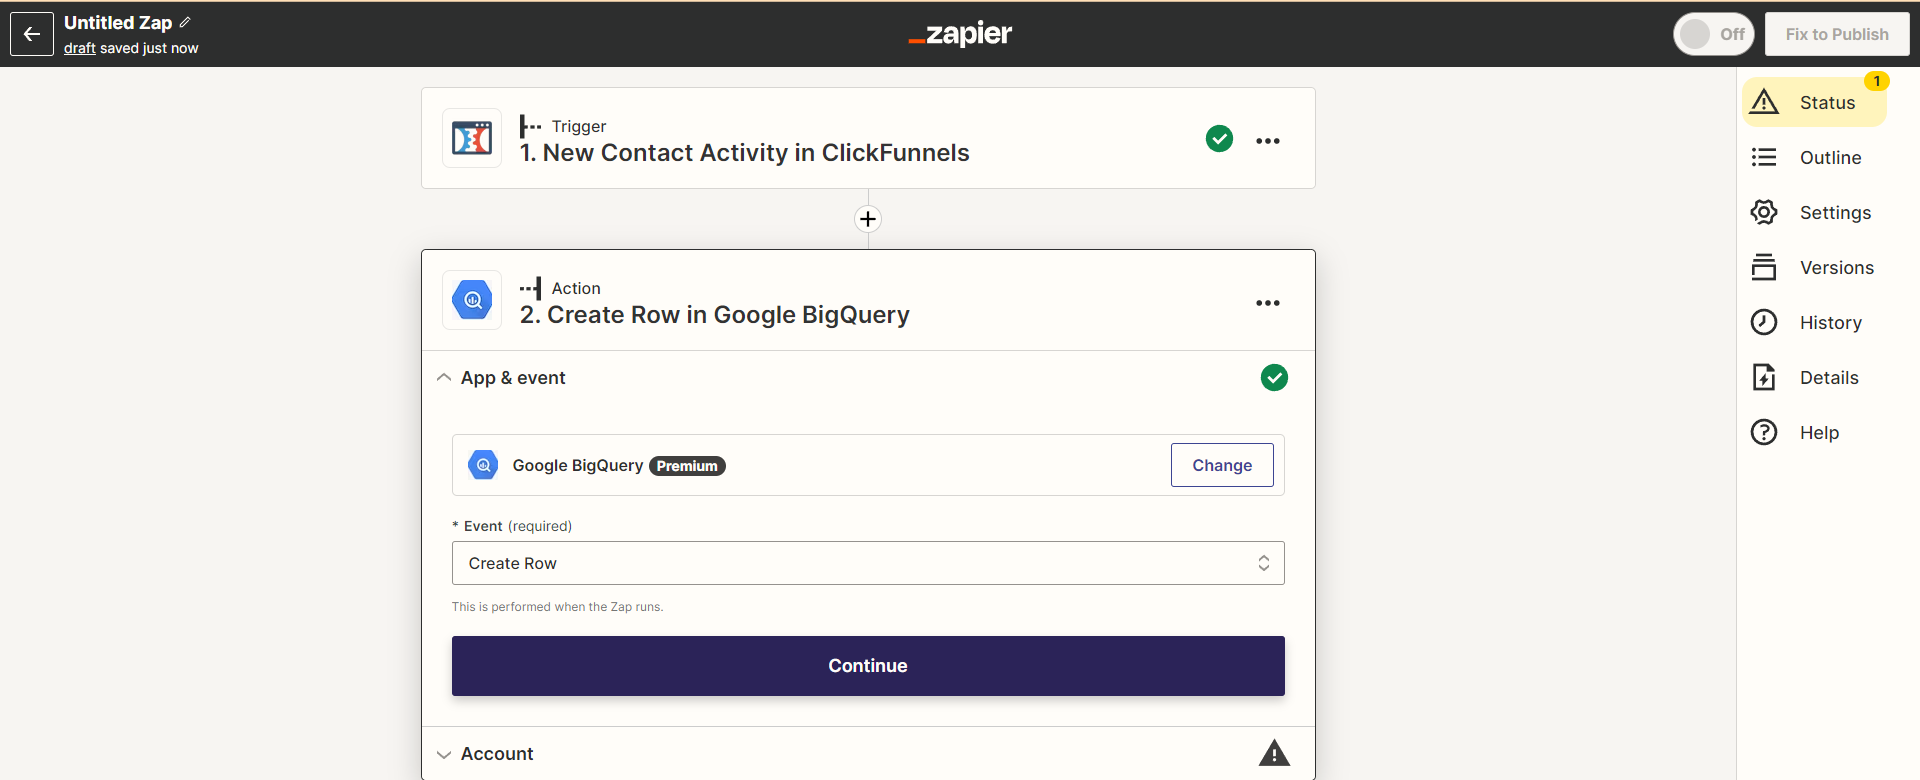 Configuring the action step in Zappier that will send data to data warehouse